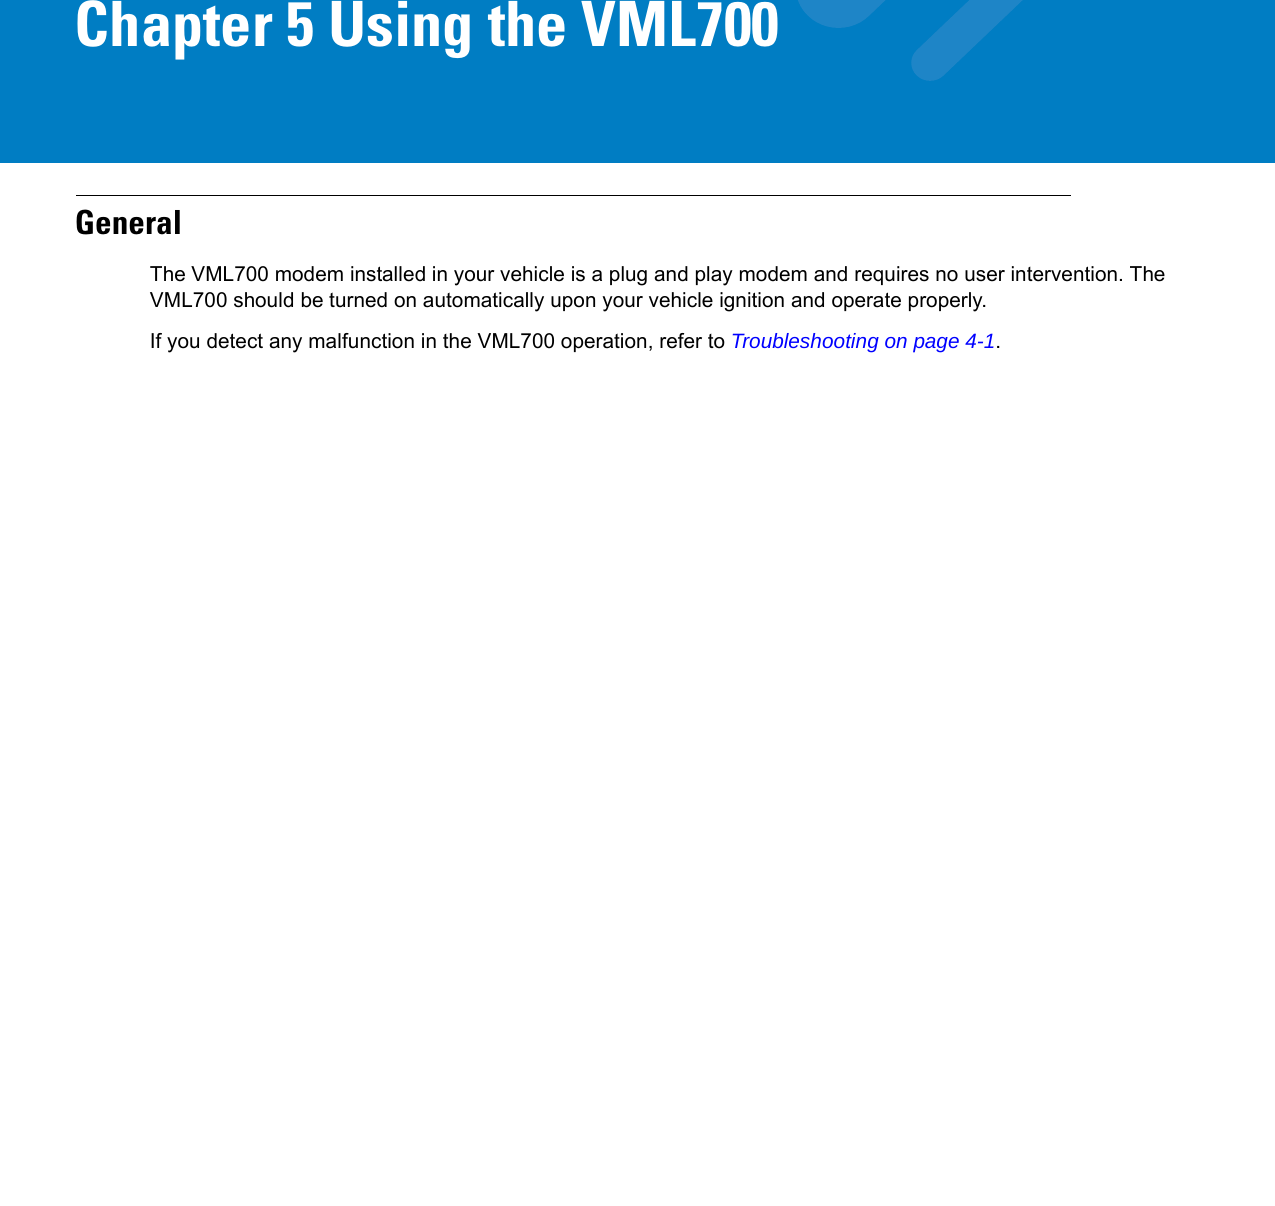 Chapter 5 Using the VML700GeneralThe VML700 modem installed in your vehicle is a plug and play modem and requires no user intervention. The VML700 should be turned on automatically upon your vehicle ignition and operate properly.If you detect any malfunction in the VML700 operation, refer to Troubleshooting on page 4-1.